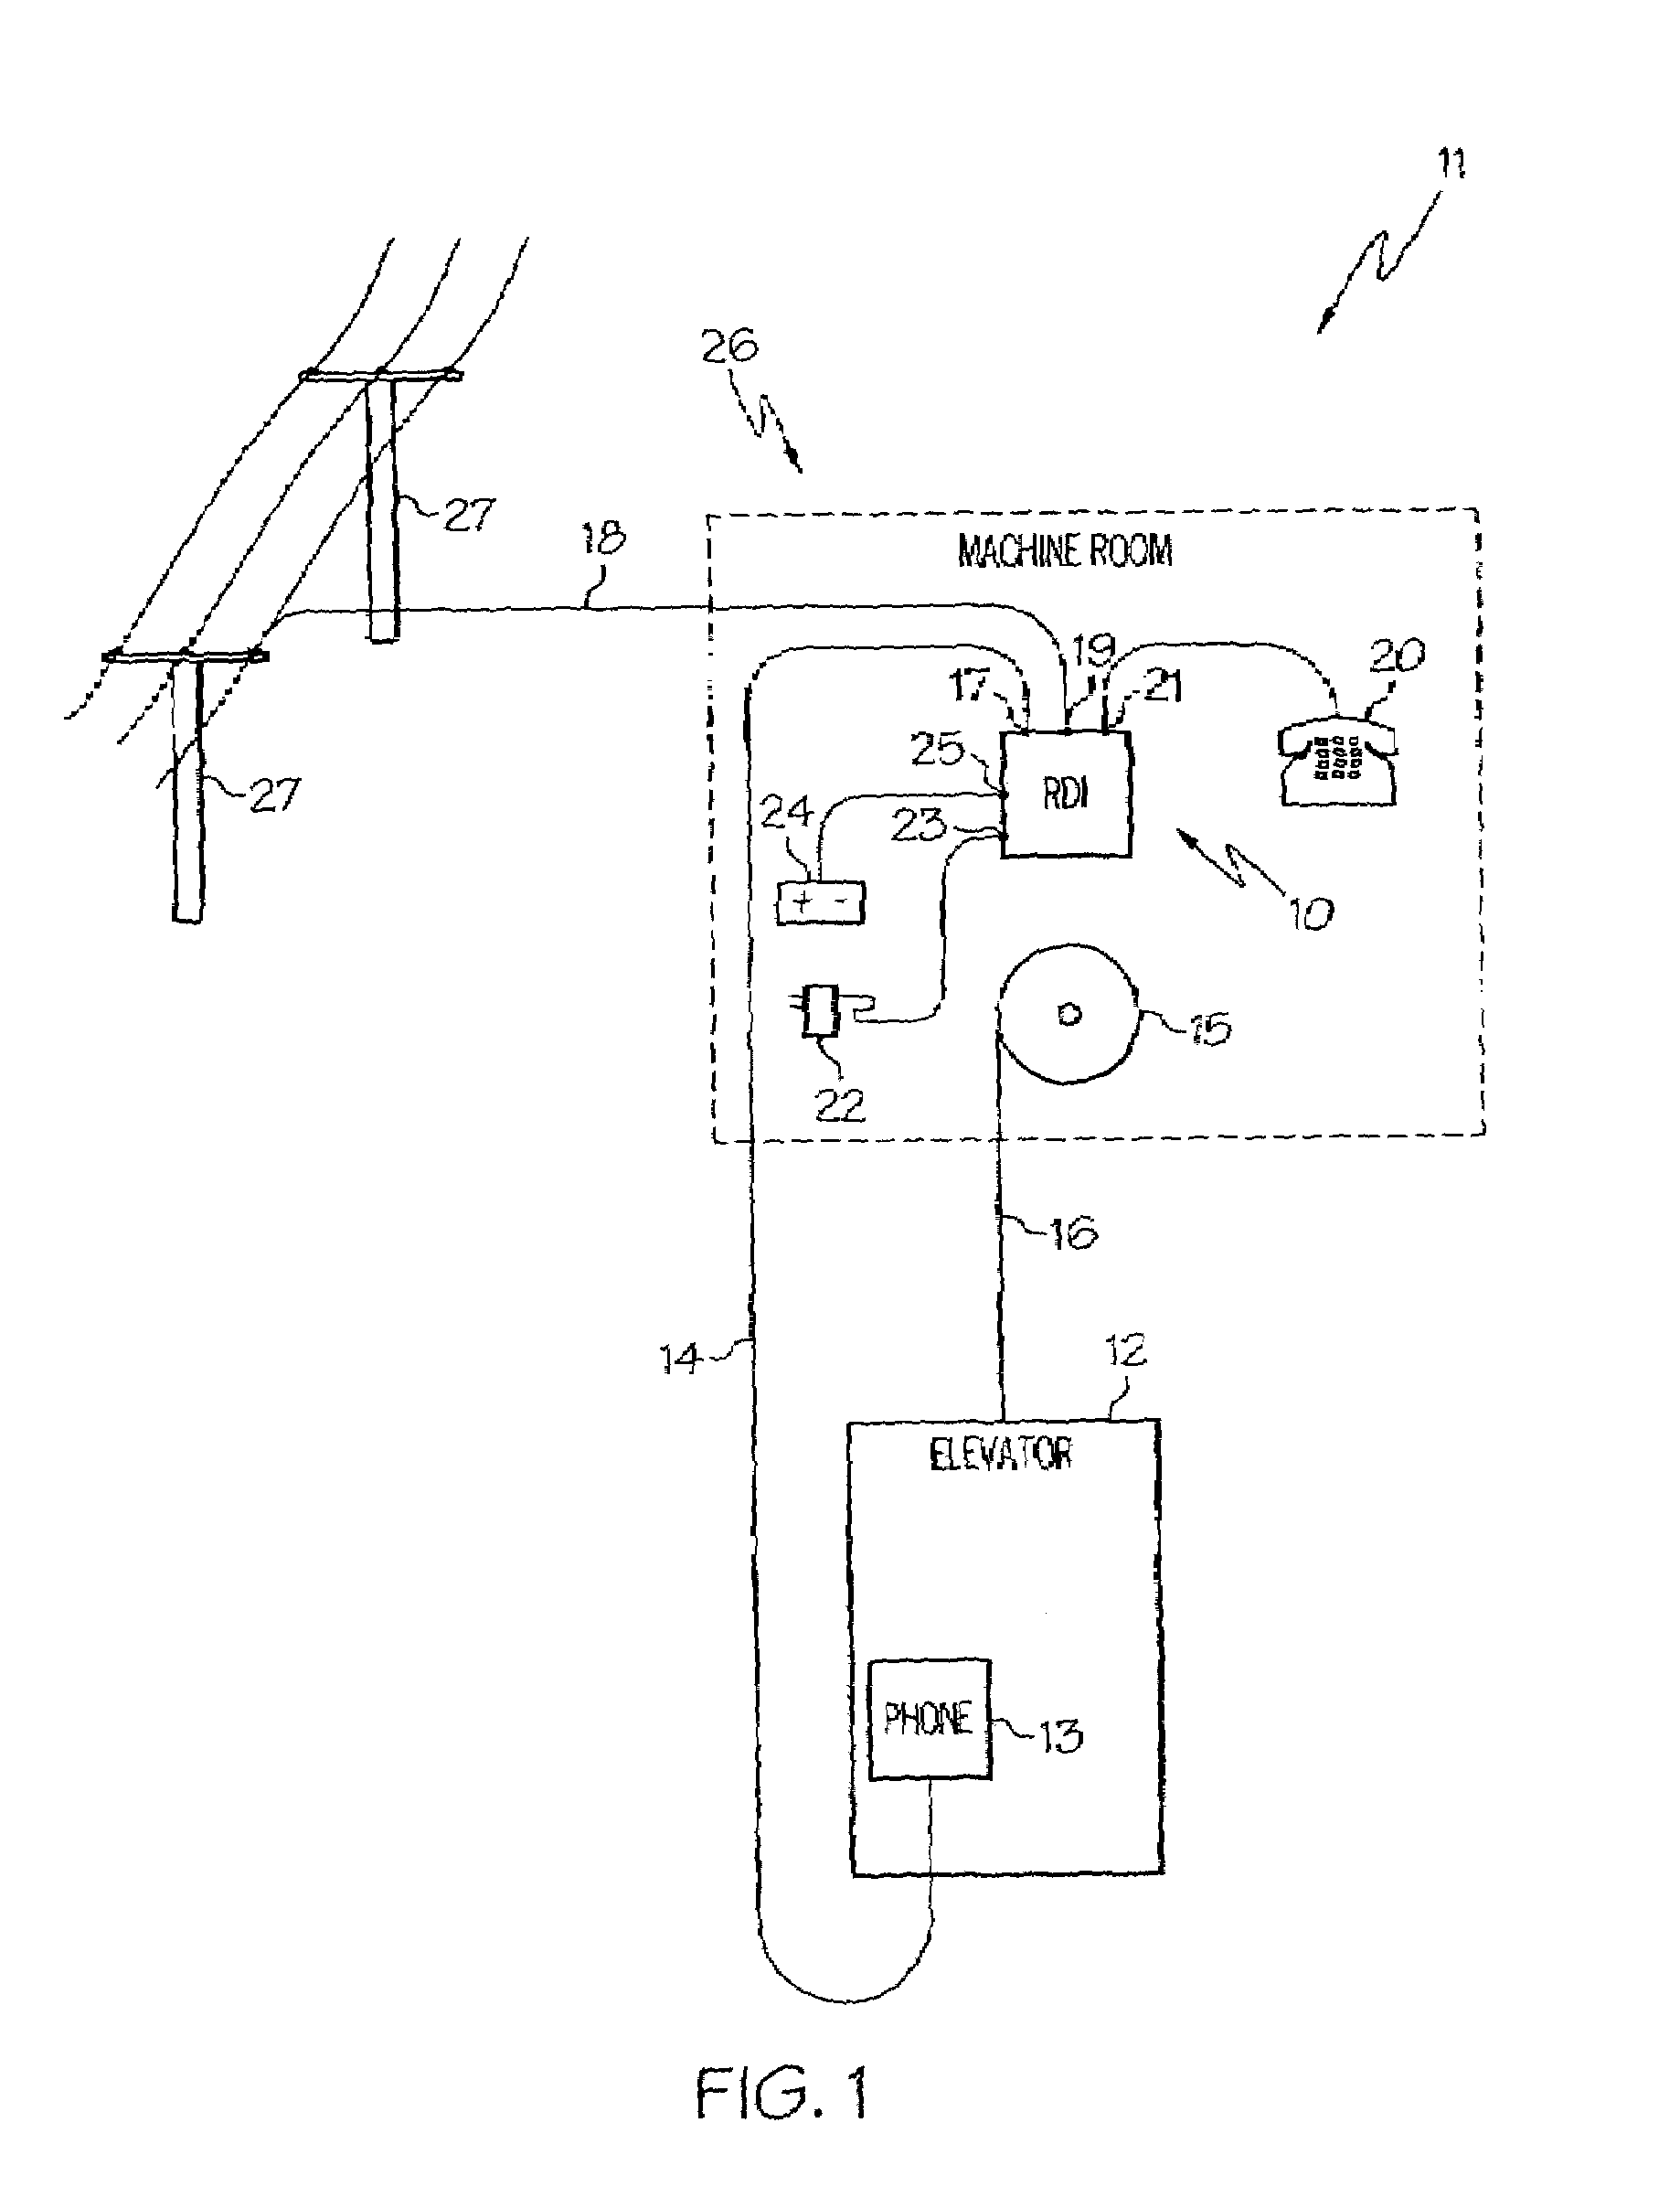 Elevator communication devices, systems and methods